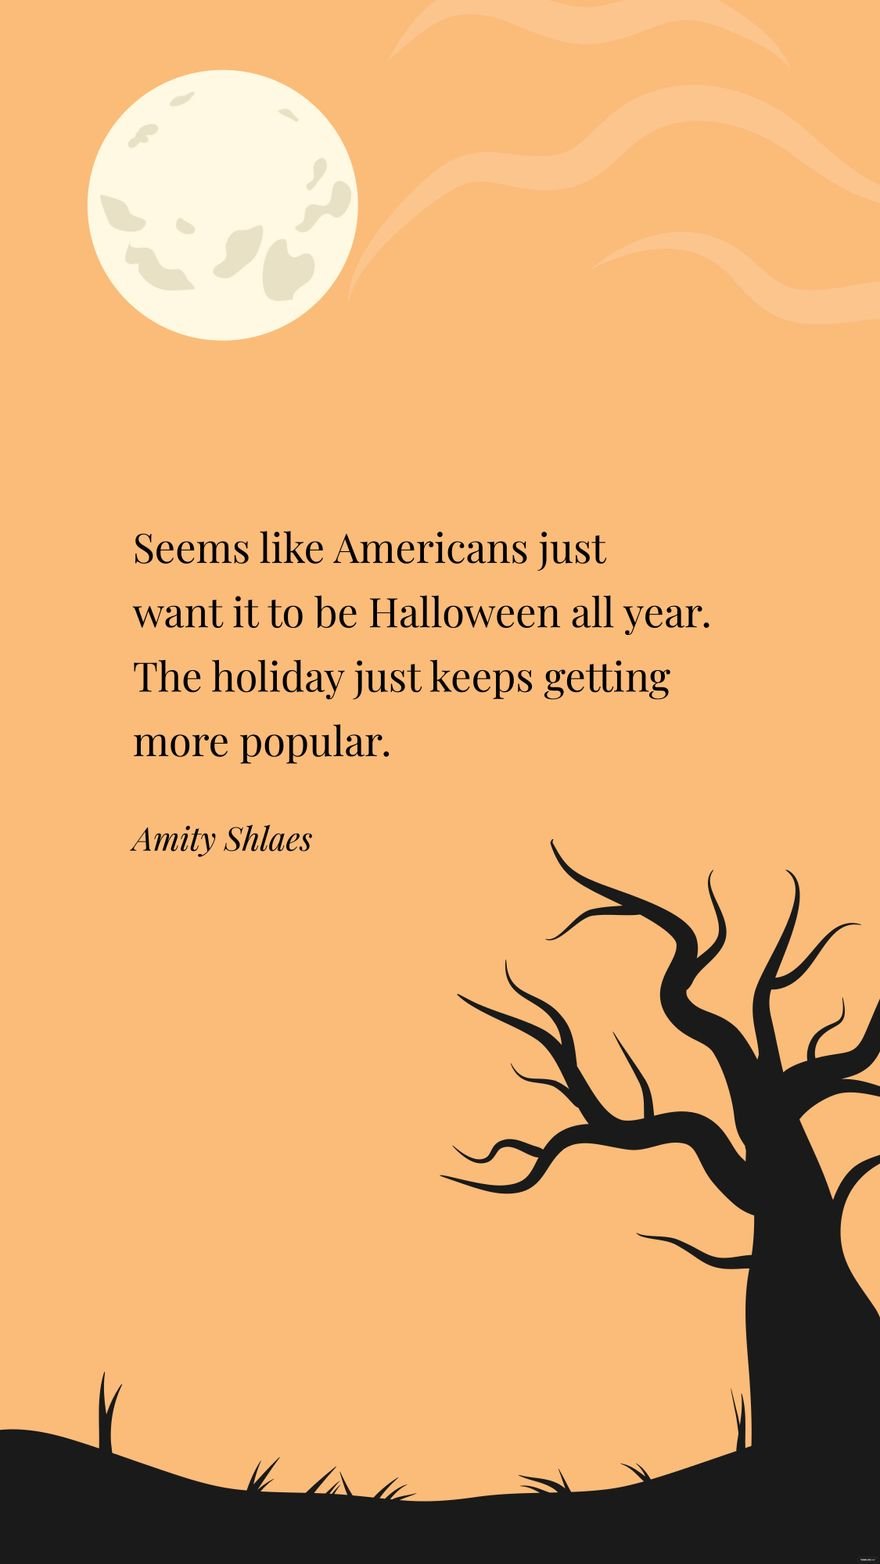 Free  Amity Shlaes- Seems like Americans just want it to be Halloween all year. The holiday just keeps getting more popular.  in JPG